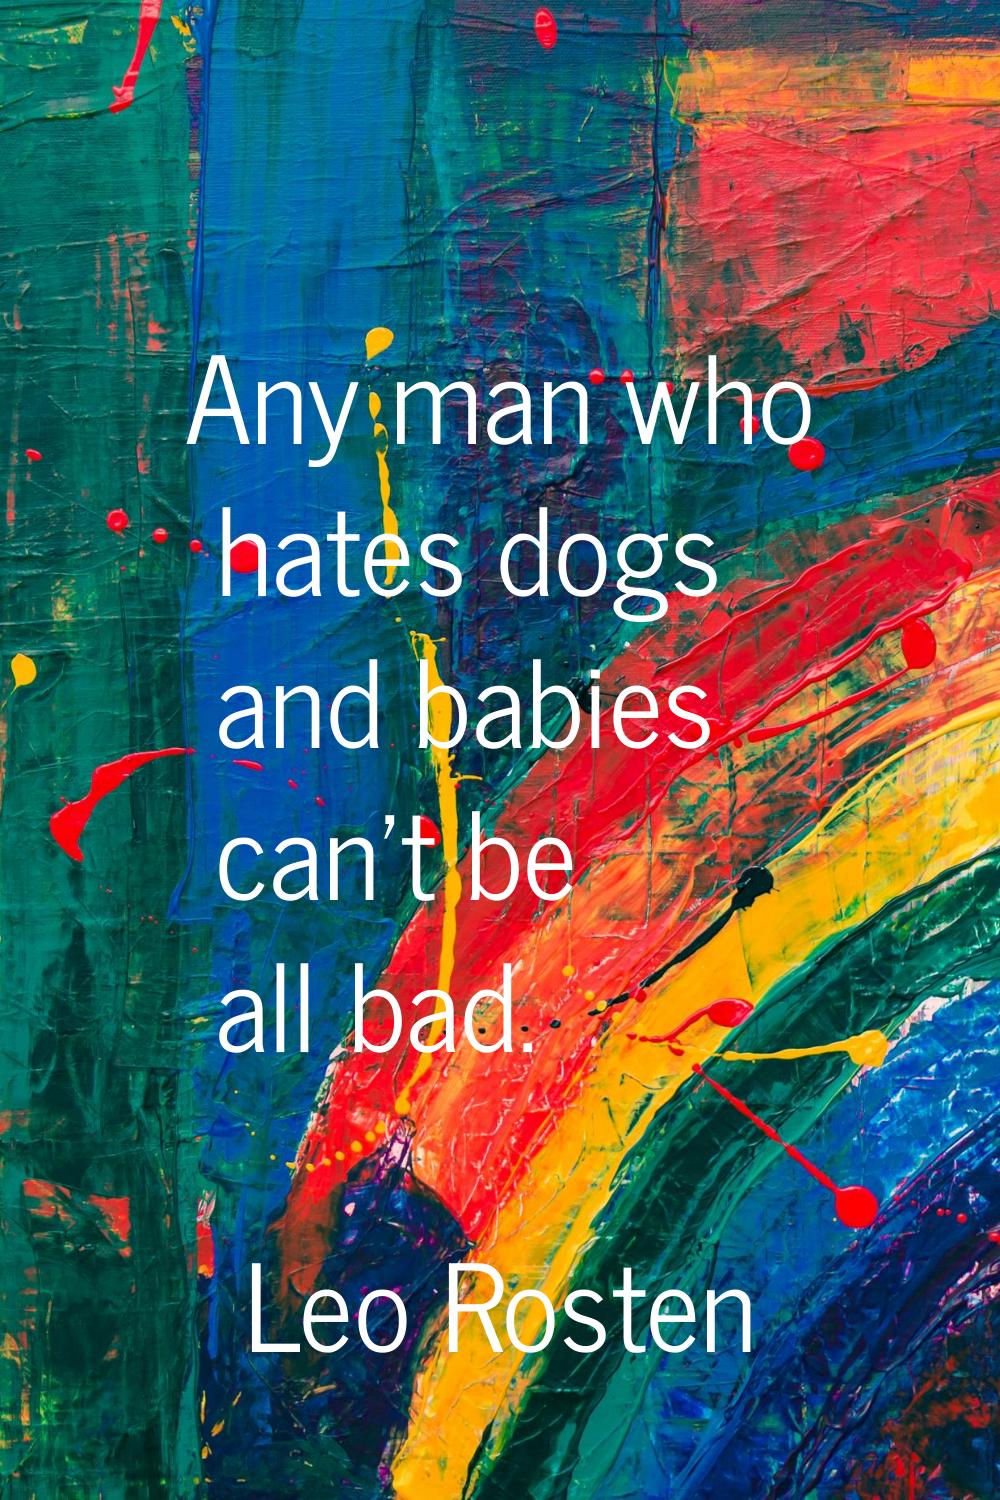 Any man who hates dogs and babies can't be all bad.